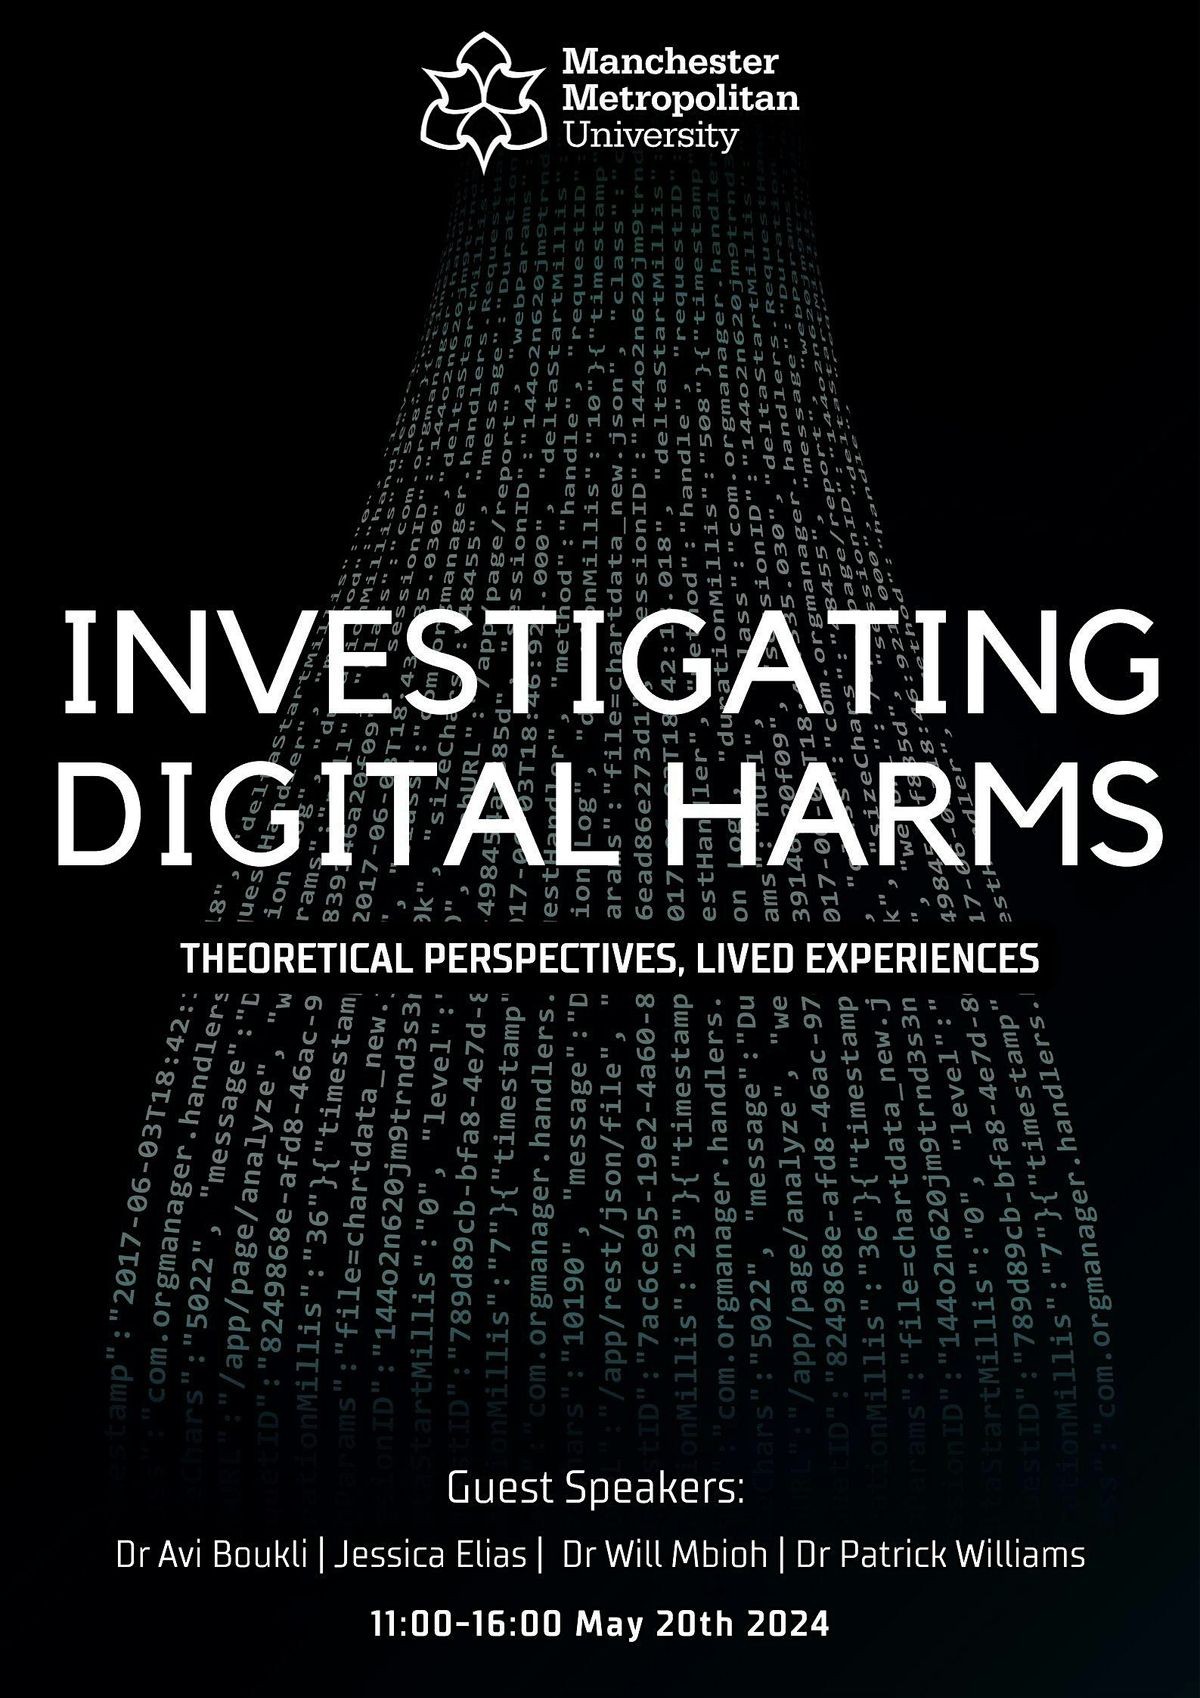 Digital Harms: Theoretical Perspectives, Lived Experiences